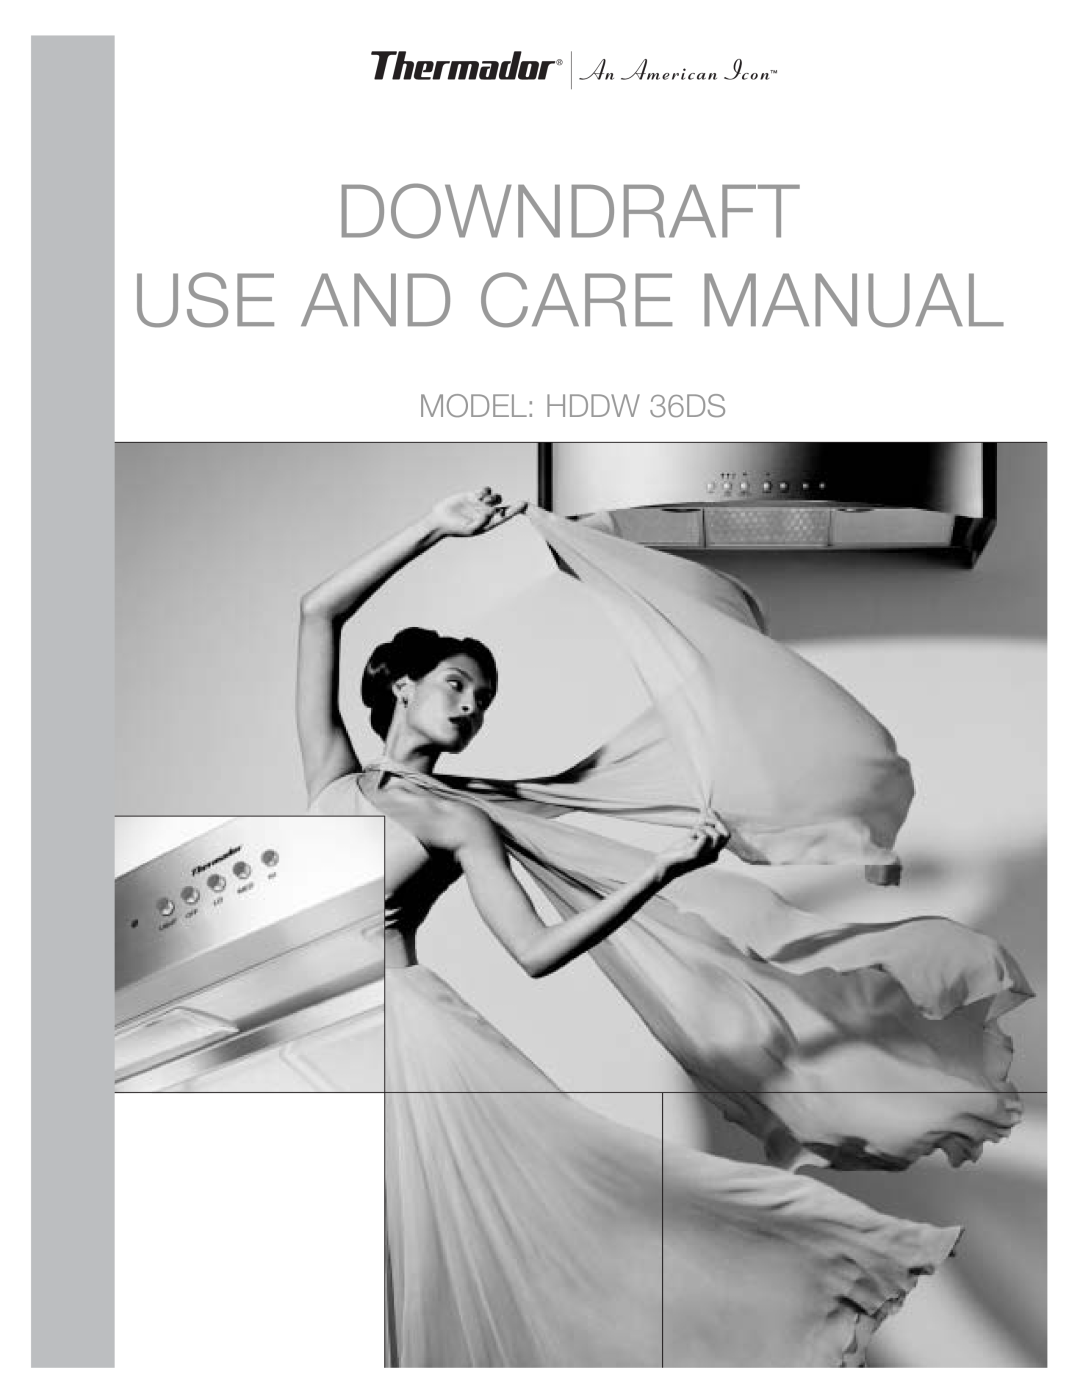 Thermador HDDW 36DS installation manual Ventildowndraftation, Useinstandllationcare Manual, MODEL MODELS HDDWCVS236DS 